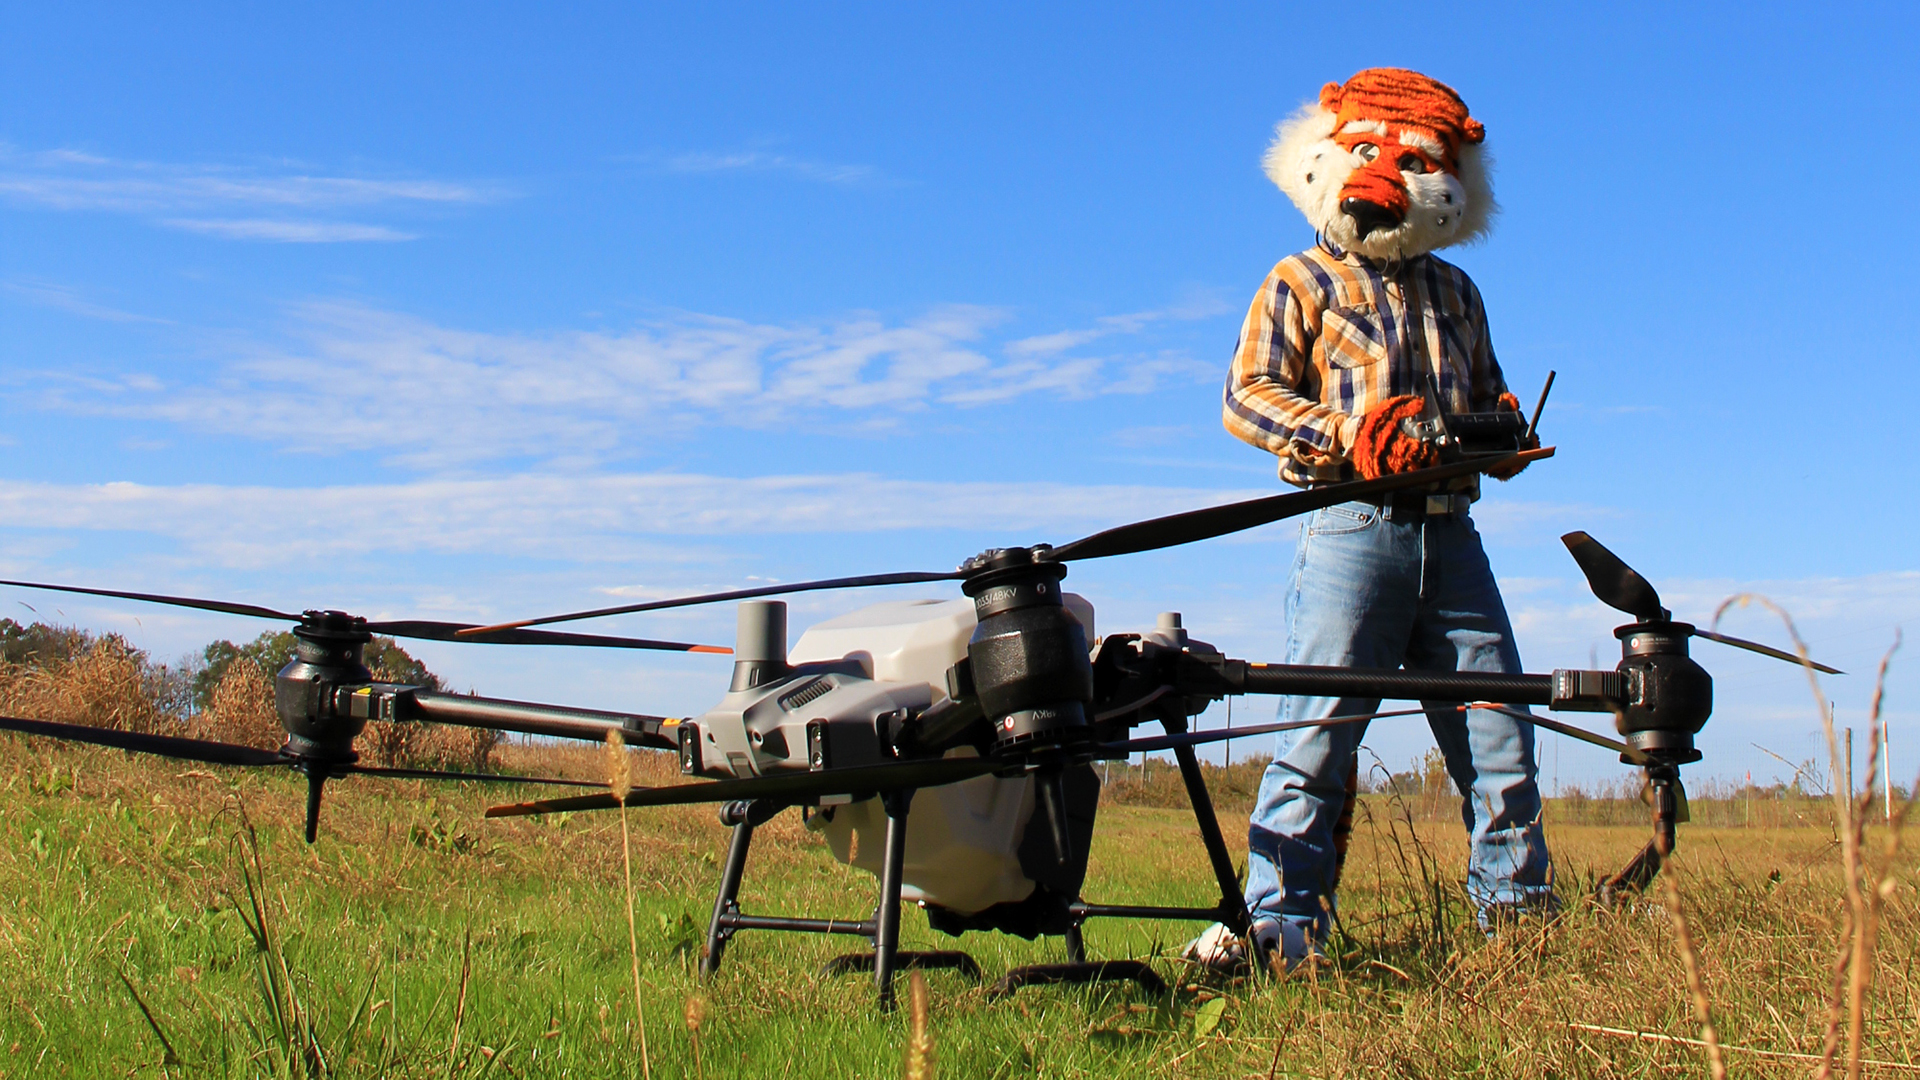 Aubie-wearing-plaid-shirt-remotely-pilots-UAV-aircraft-UAS-on-farm-land-in-Alabama-student-college-Path-to-the-Plains-with-Southern-Union